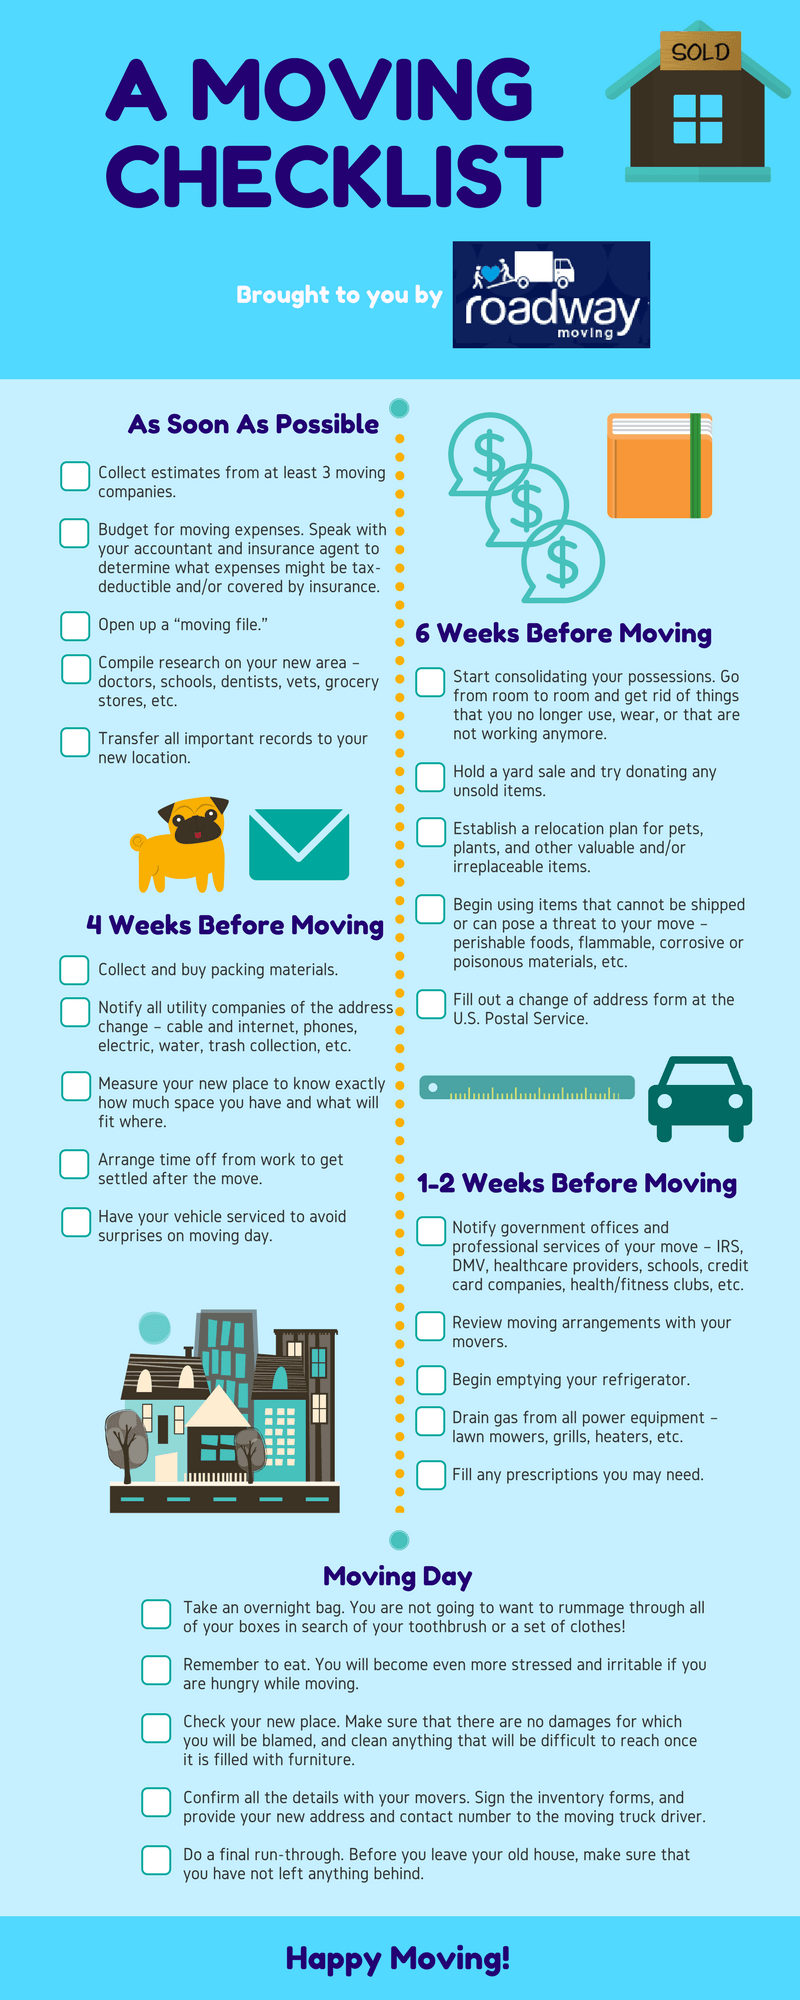 https://www.roadwaymoving.com/wp-content/uploads/2019/08/Moving-Checklist-New-York.png